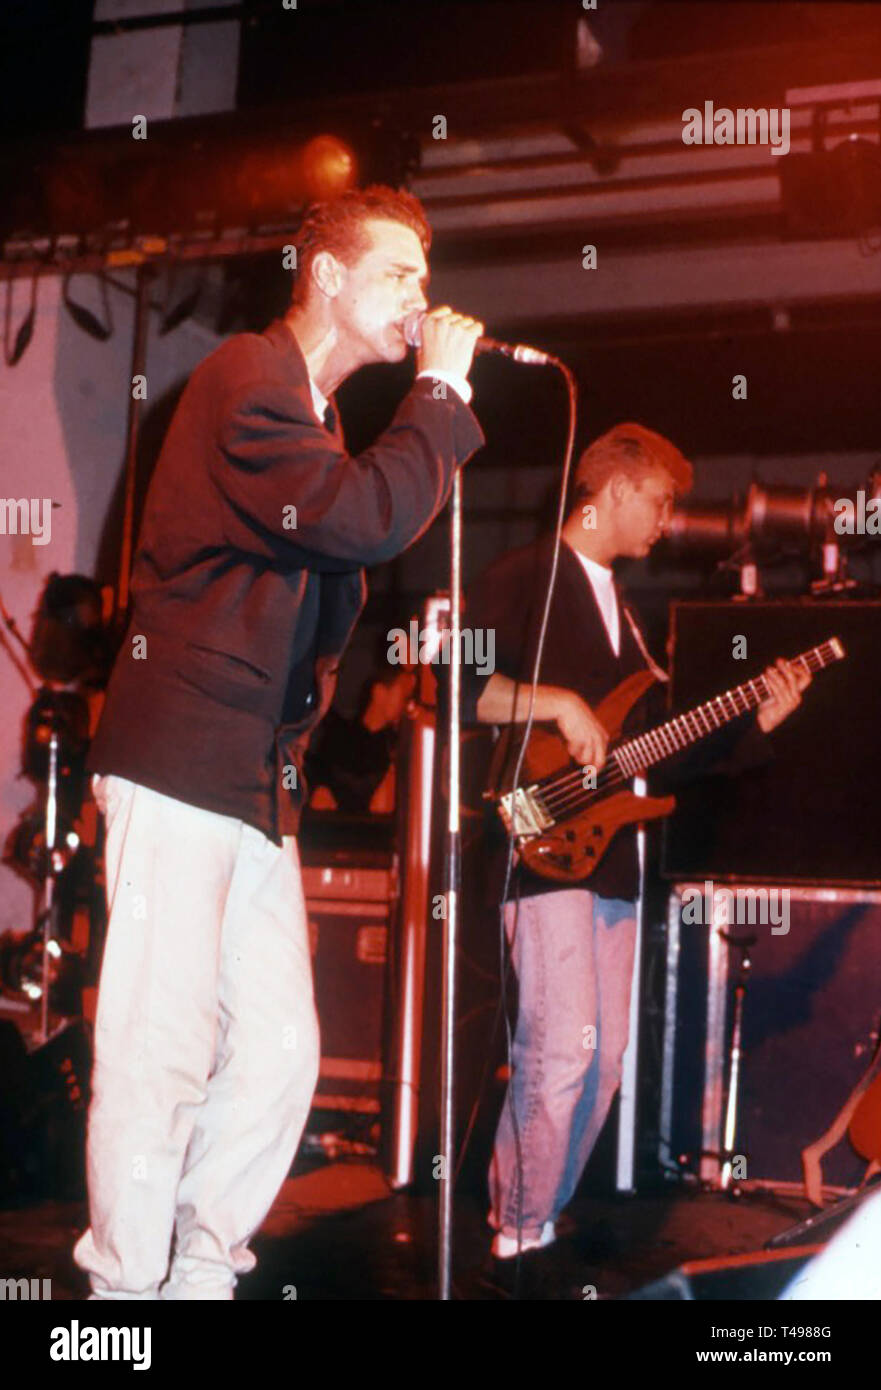 CURIOSITY KILLED THE CAT British pop band about about 1988 with lead singer Ben Volpeliere Stock Photo